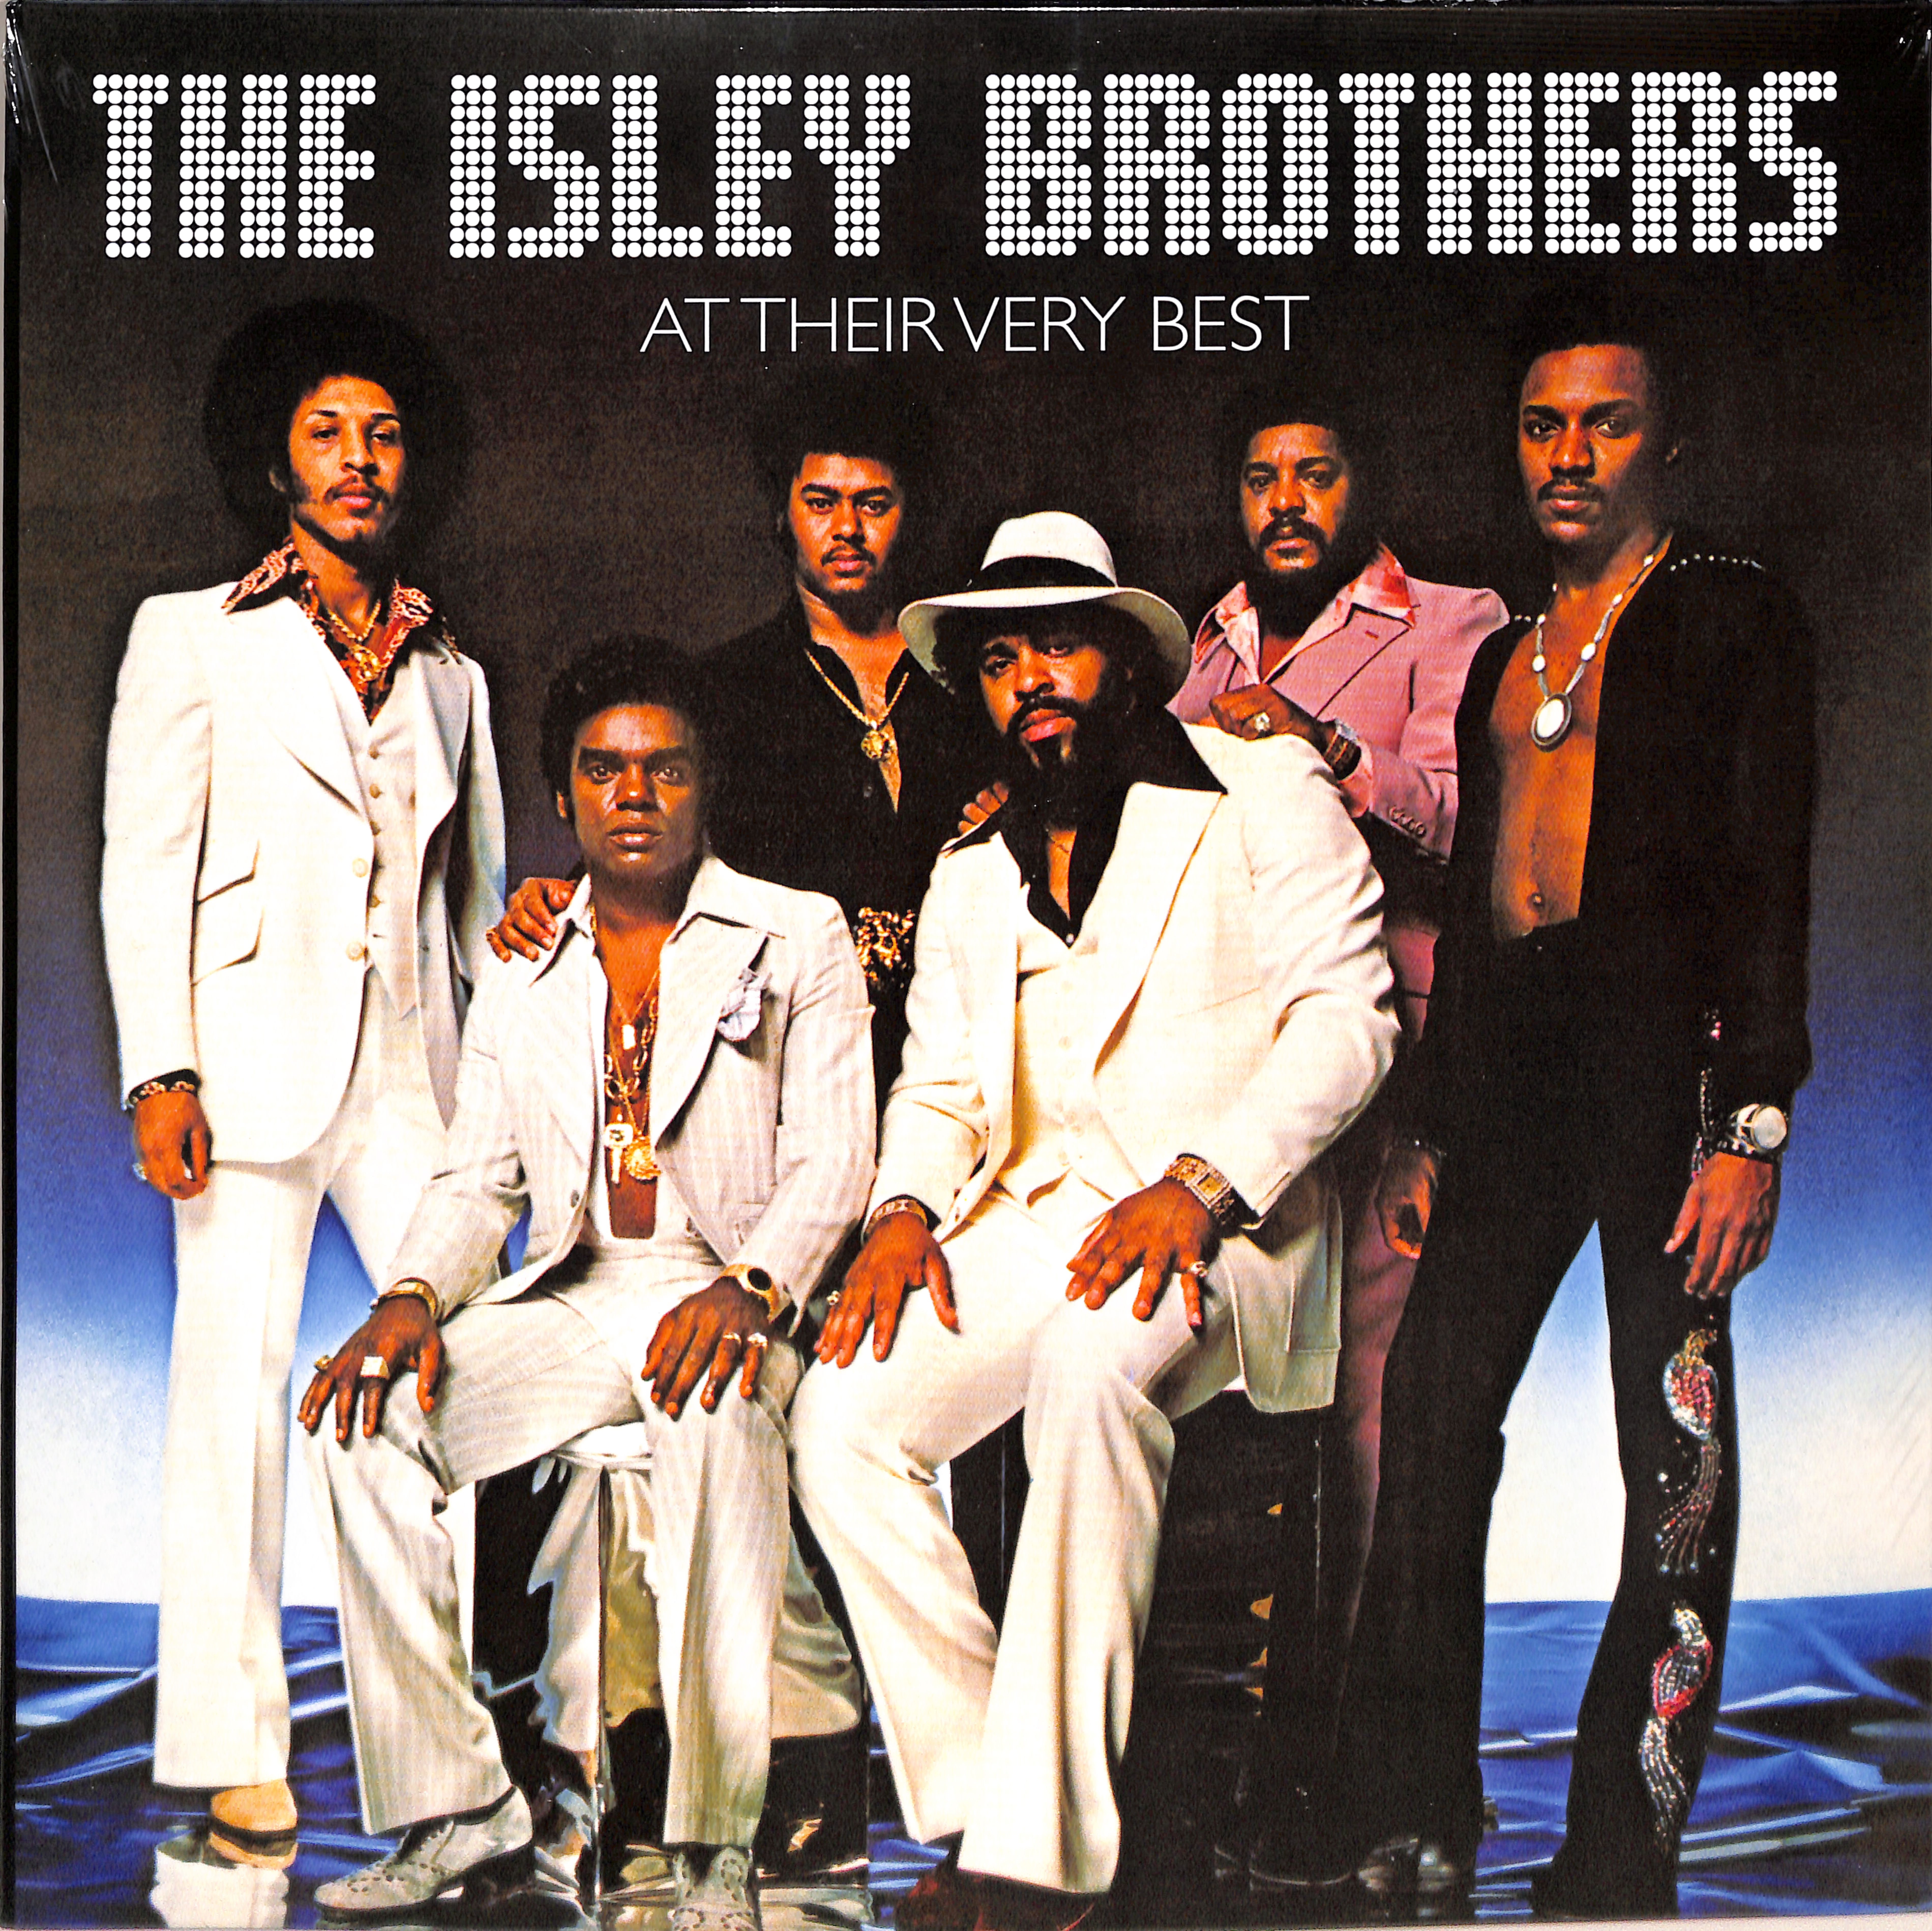 isley brothers songs